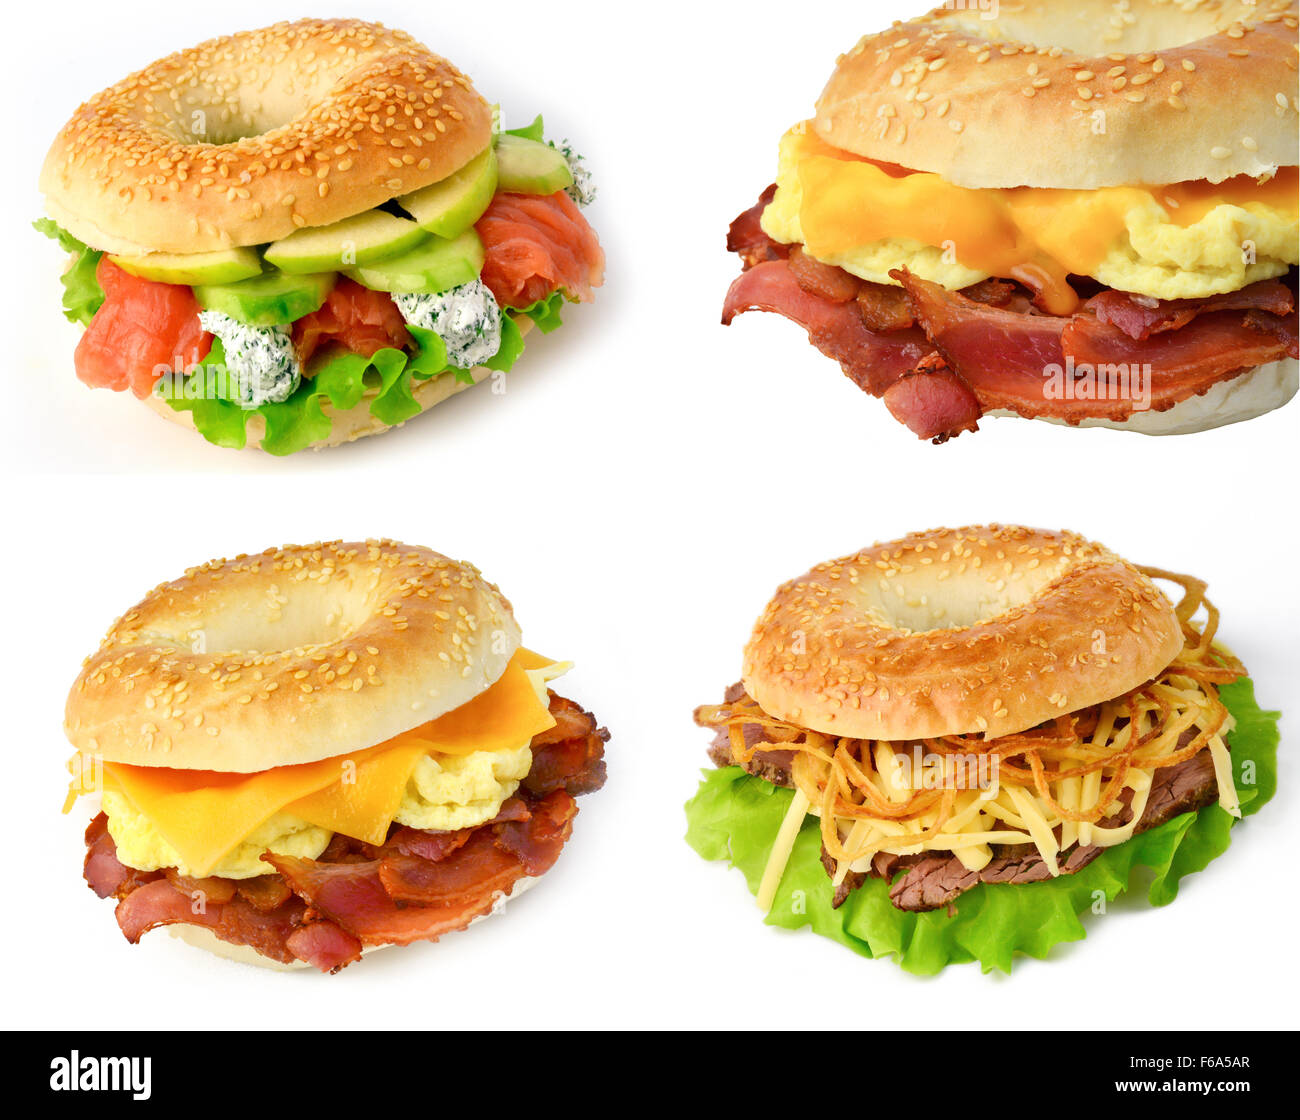 Collage of breakfast bagel sandwiches on white background Stock Photo